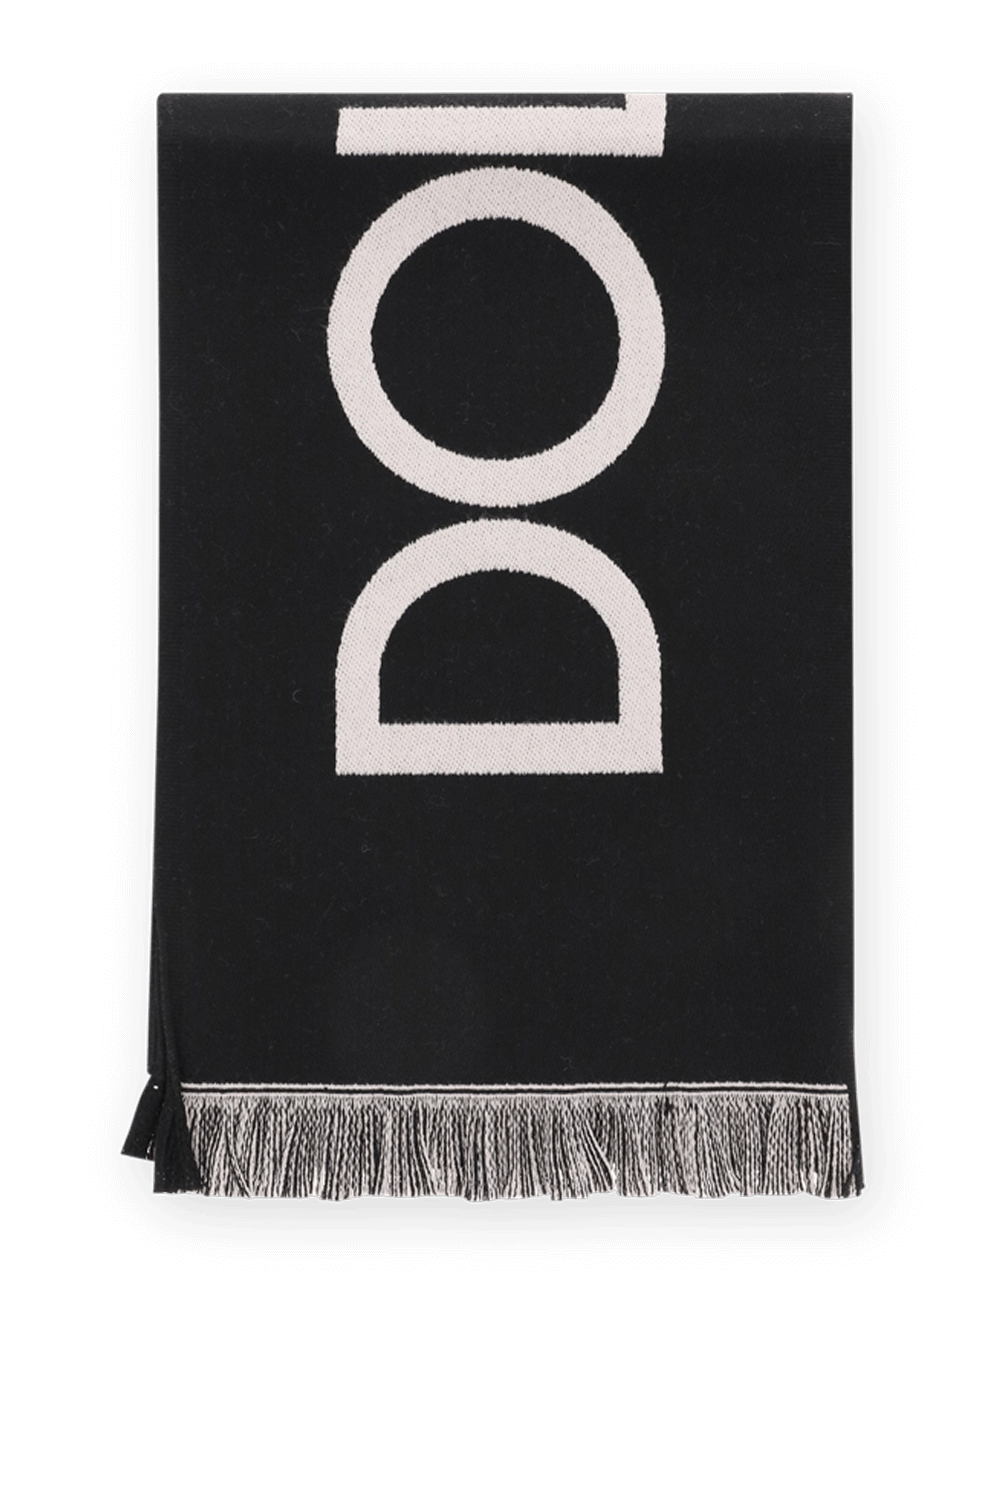 Dolce and Gabbana Wool Scarf in Black and White DOLCE & GABBANA